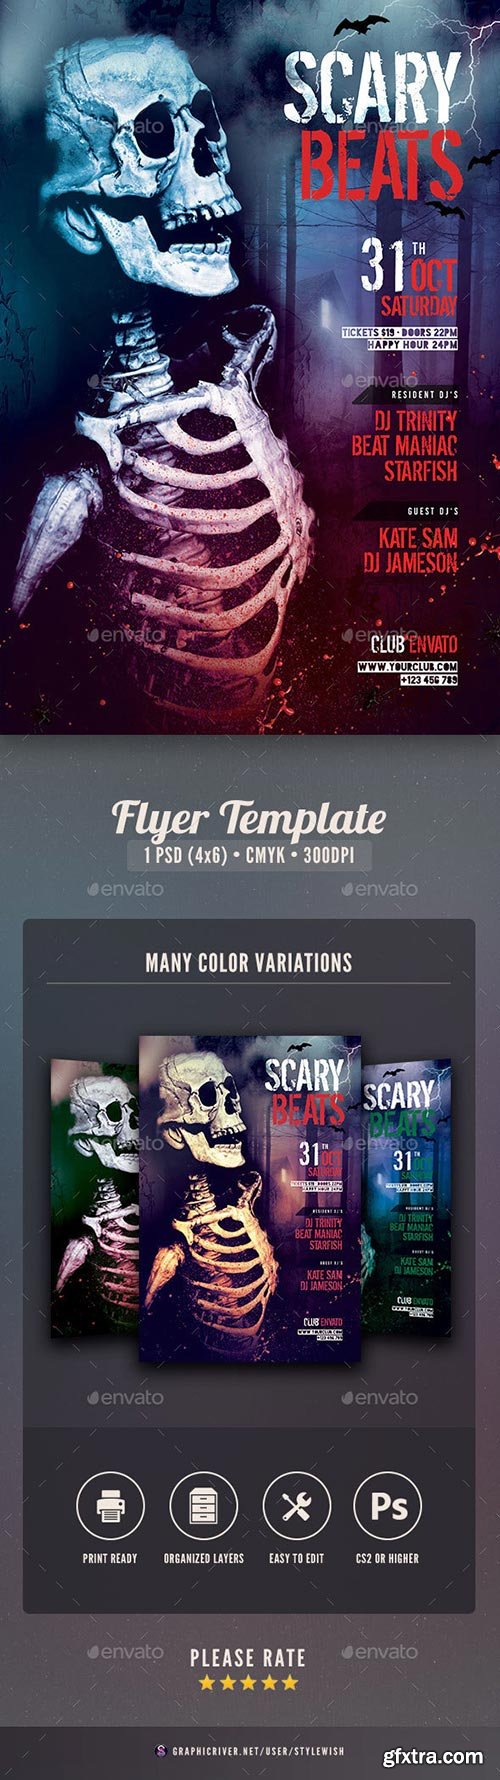 Graphicriver - Scary Beats Flyer 12924359